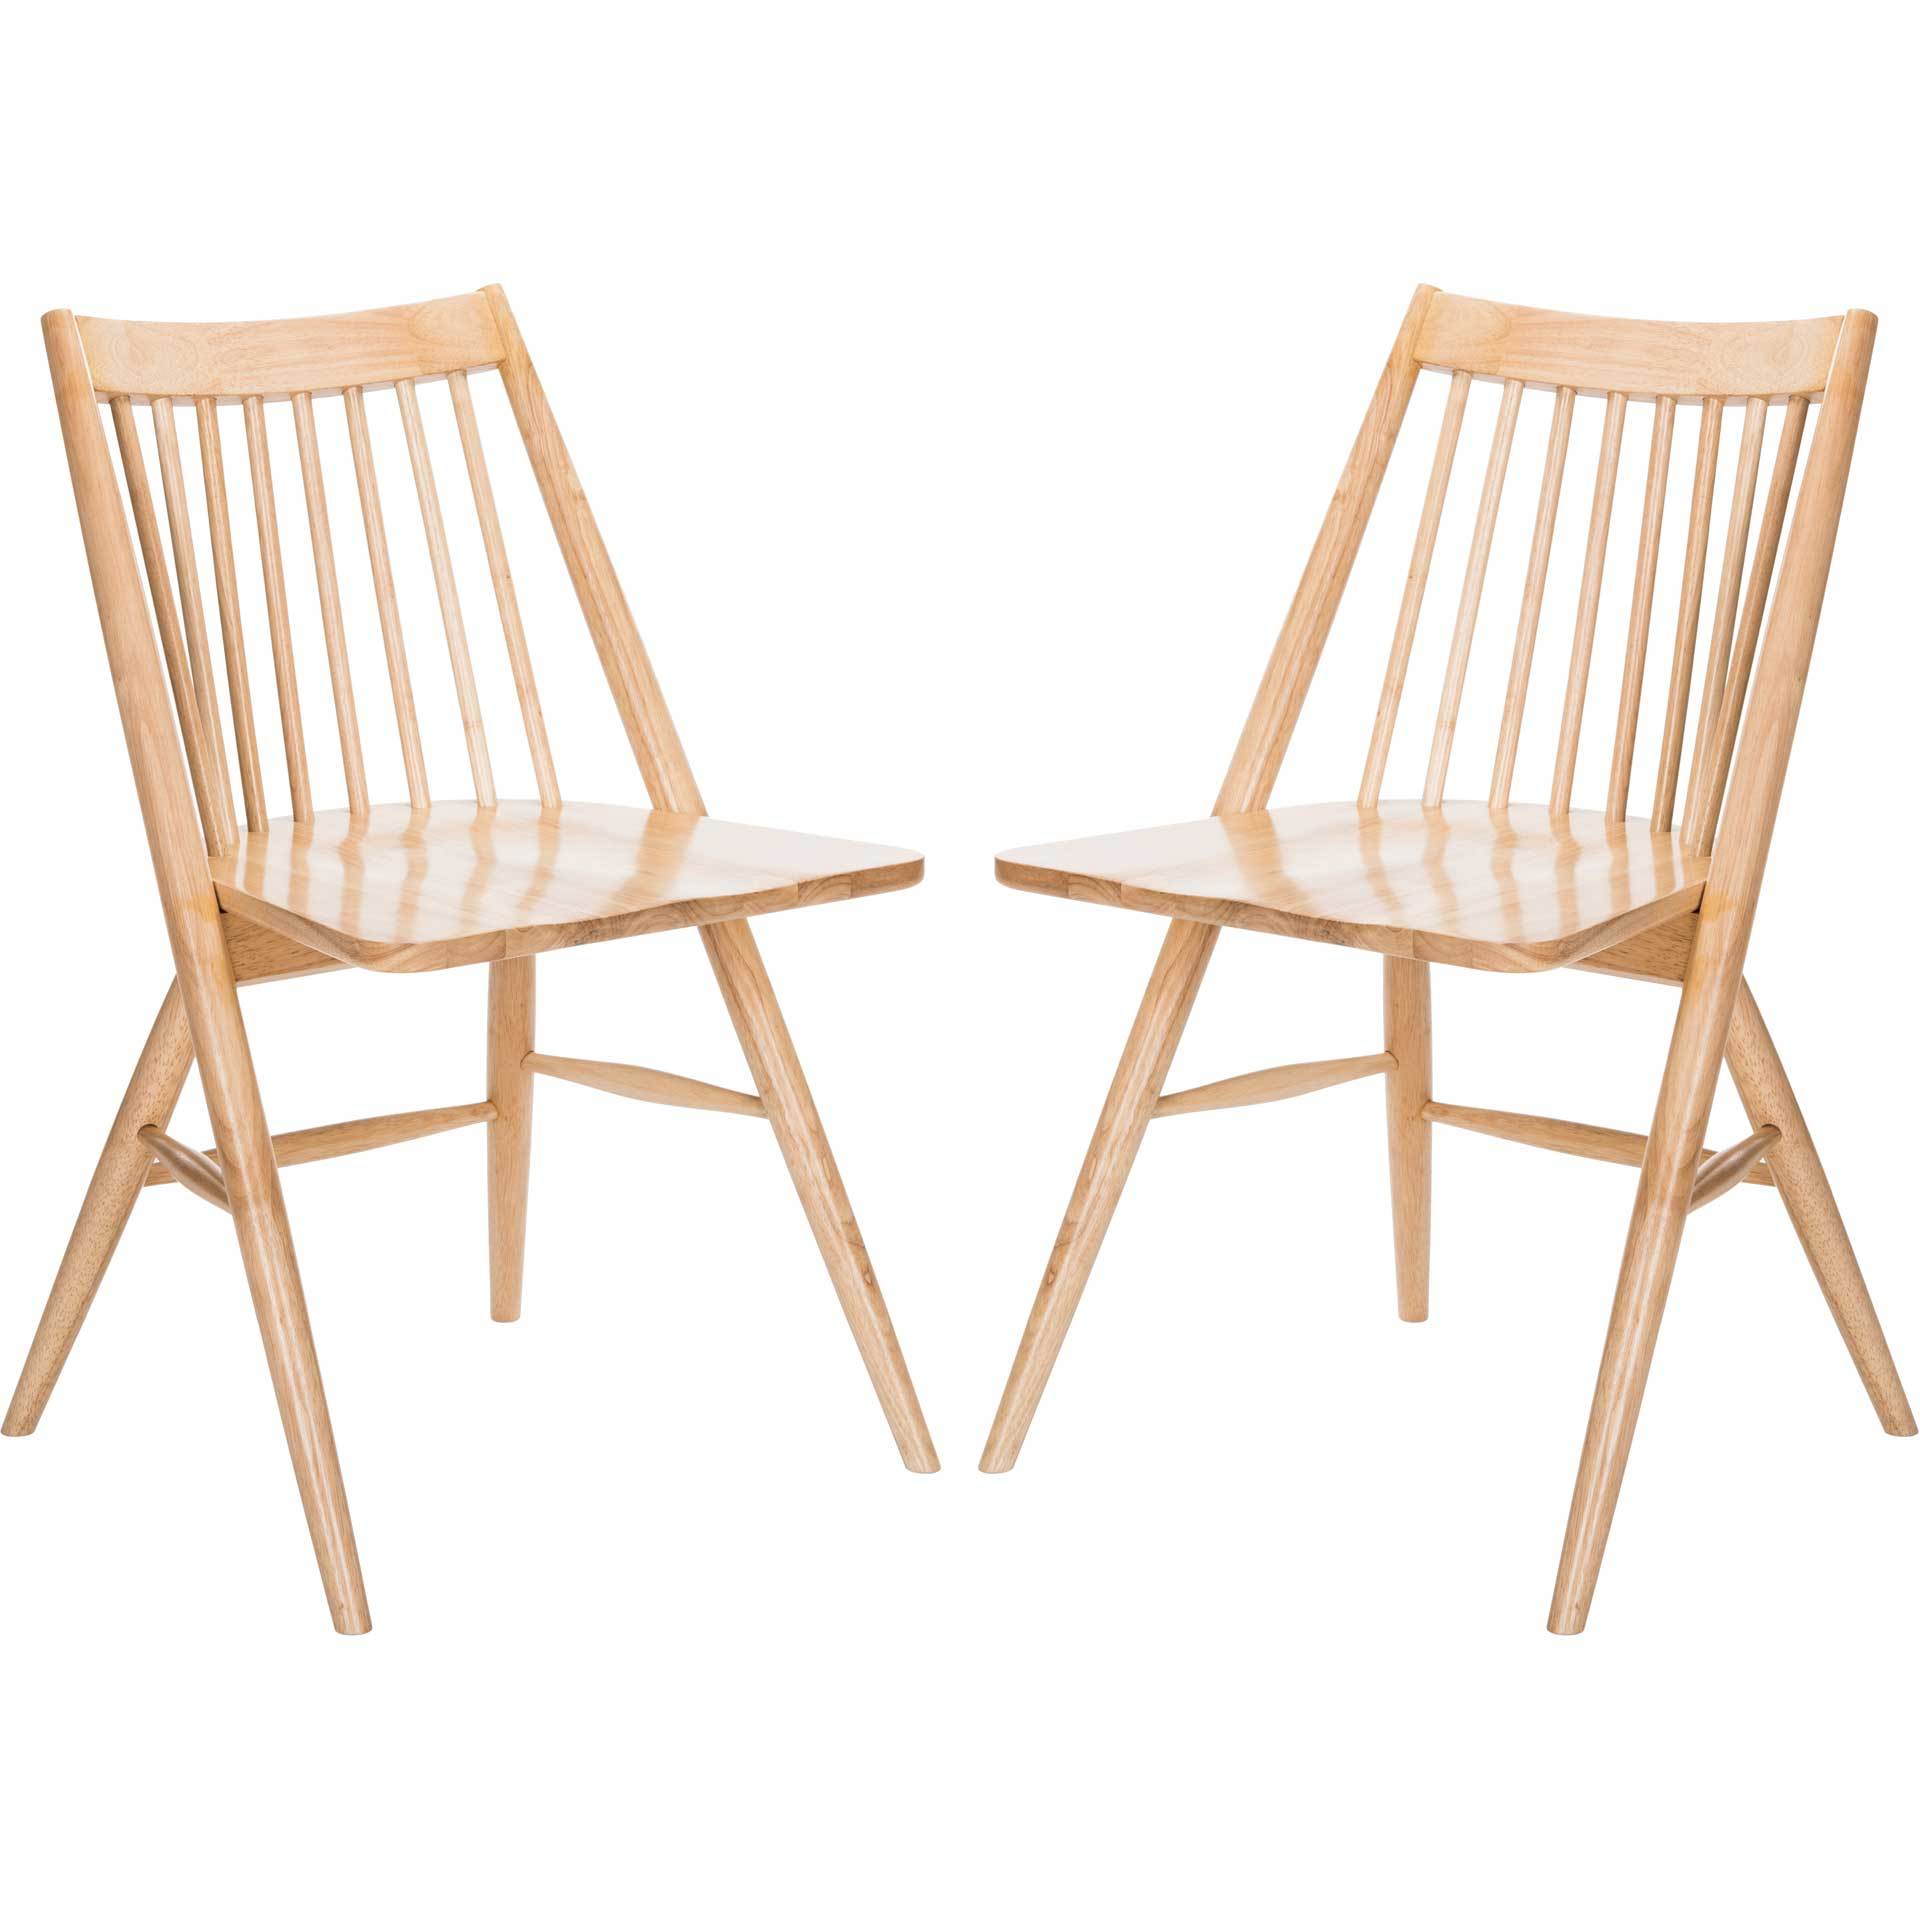 Wrangler Dining Chair Natural (Set of 2)